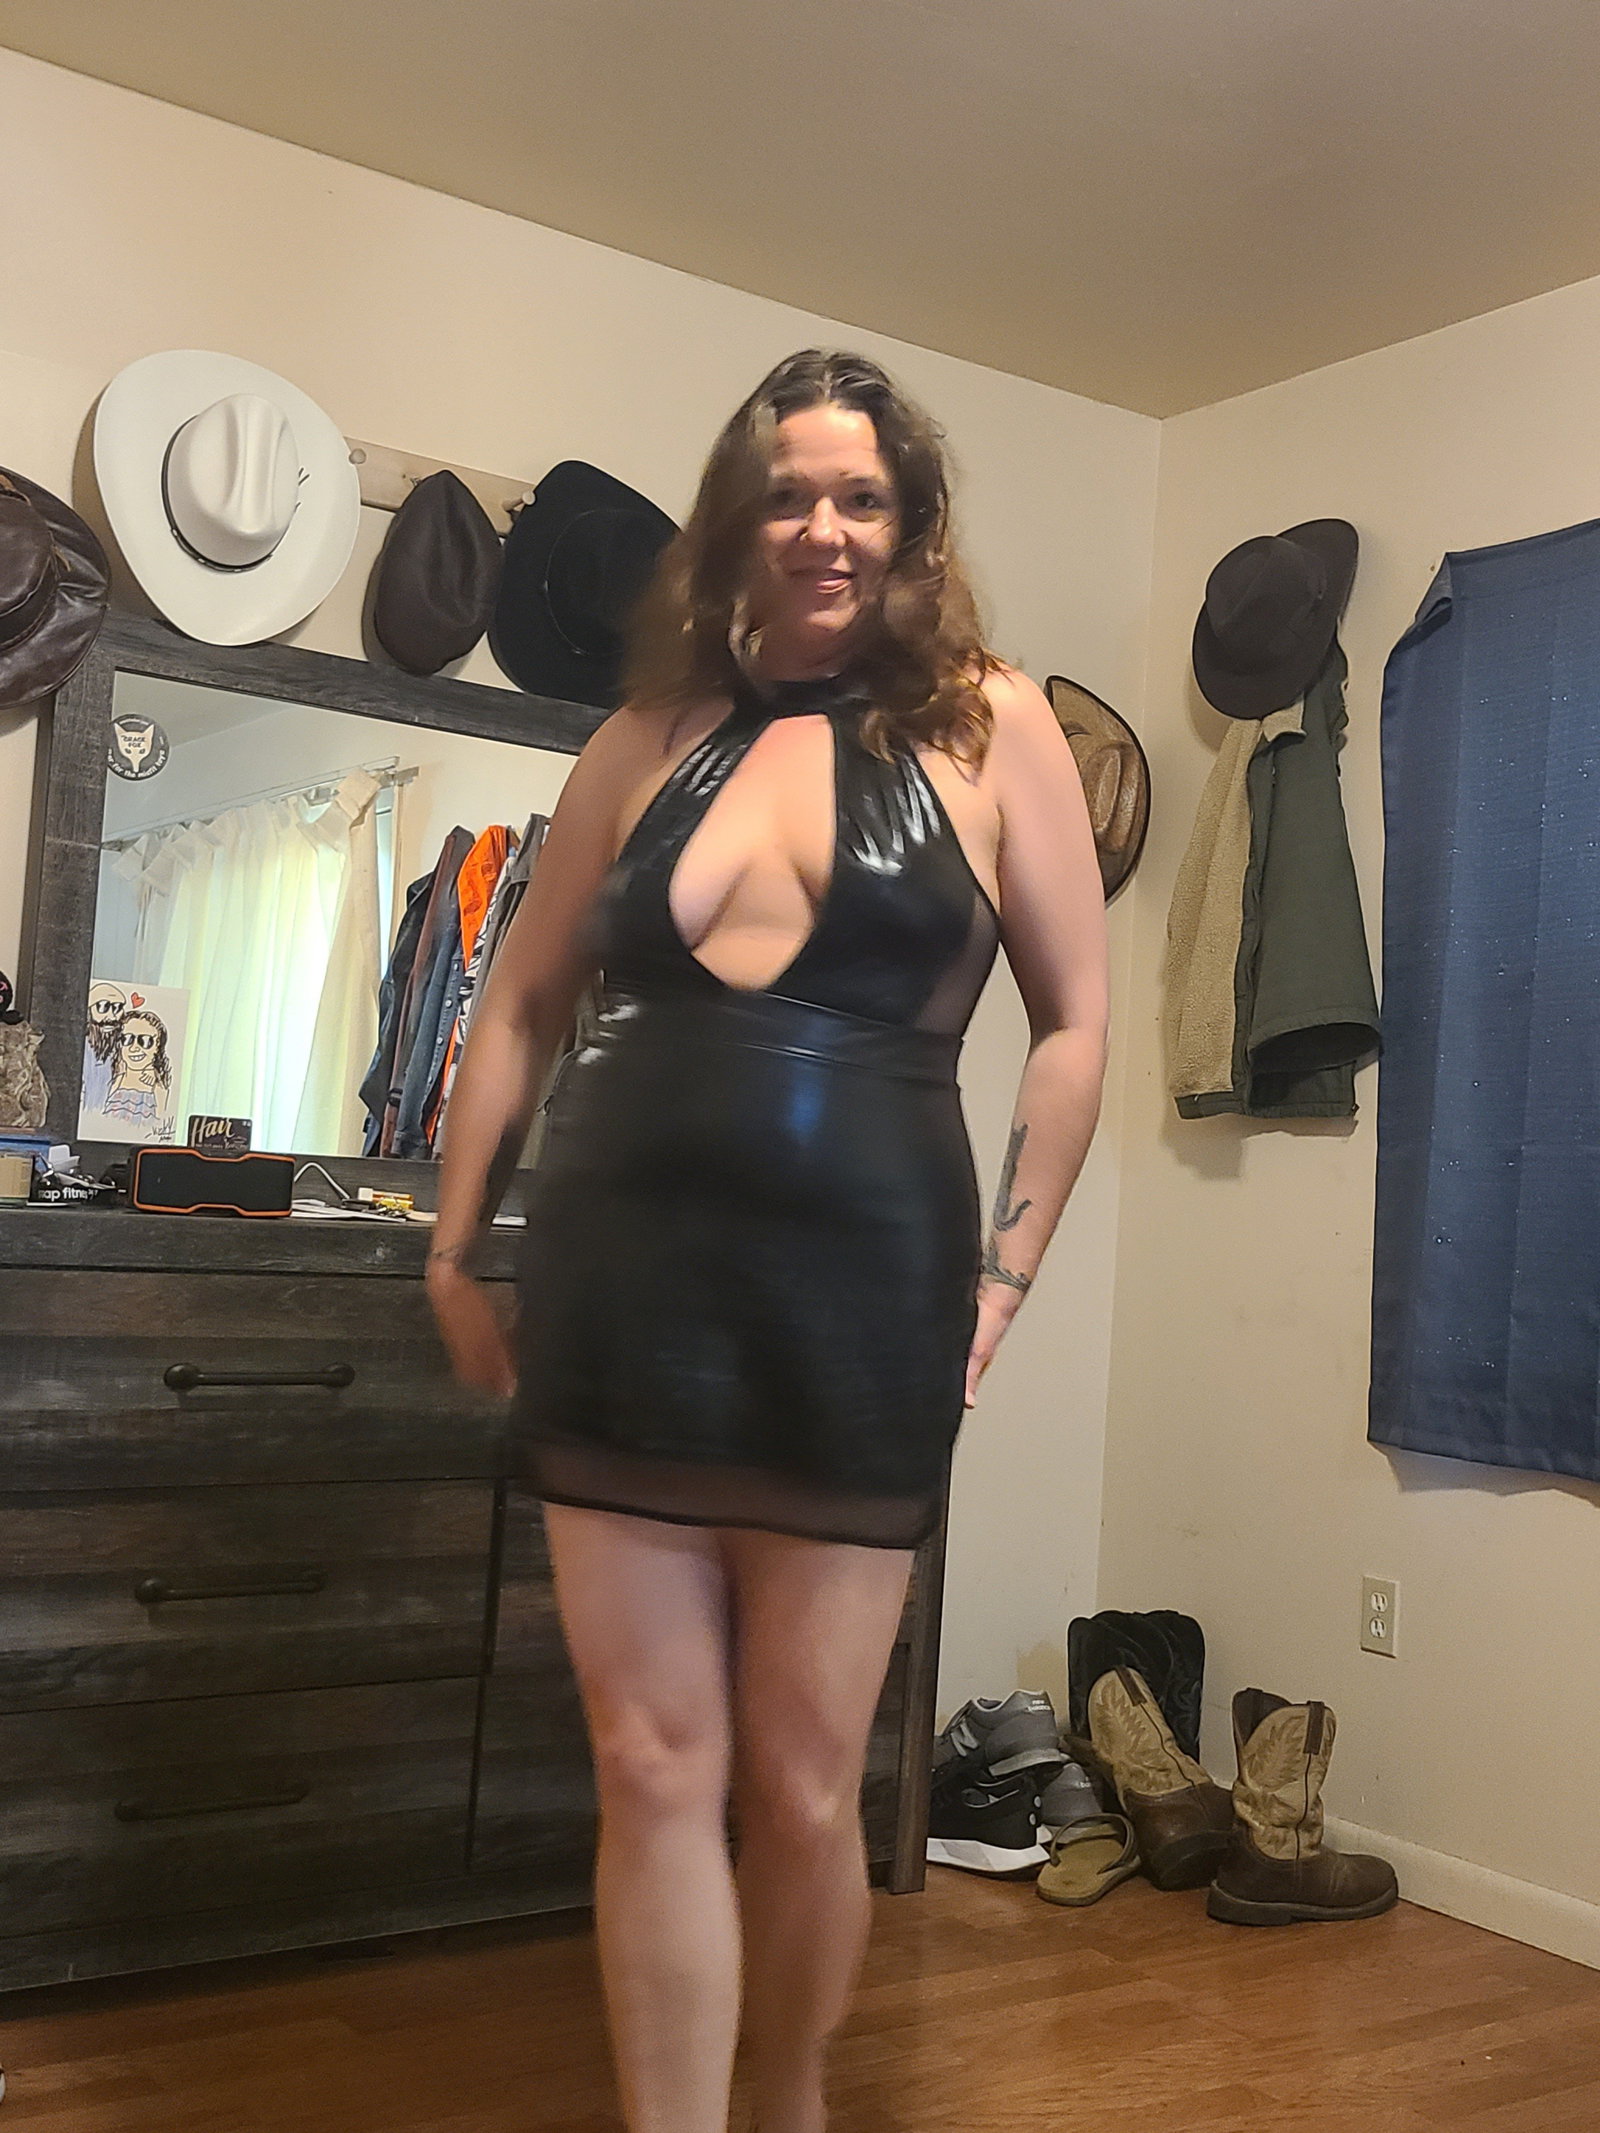 Photo by ExhibCouplePlayTime with the username @ExhibCouplePlayTime, who is a verified user,  July 24, 2023 at 6:27 PM. The post is about the topic Amateurs and the text says 'Decided this is a great club dress as well, can pop my tits out easy and if I lean forward at all it shows off a nice amount of cheeks and the bottom of my lips, but you all know I'm gonna bend all the way over and pull it up in the crowd anyway..'